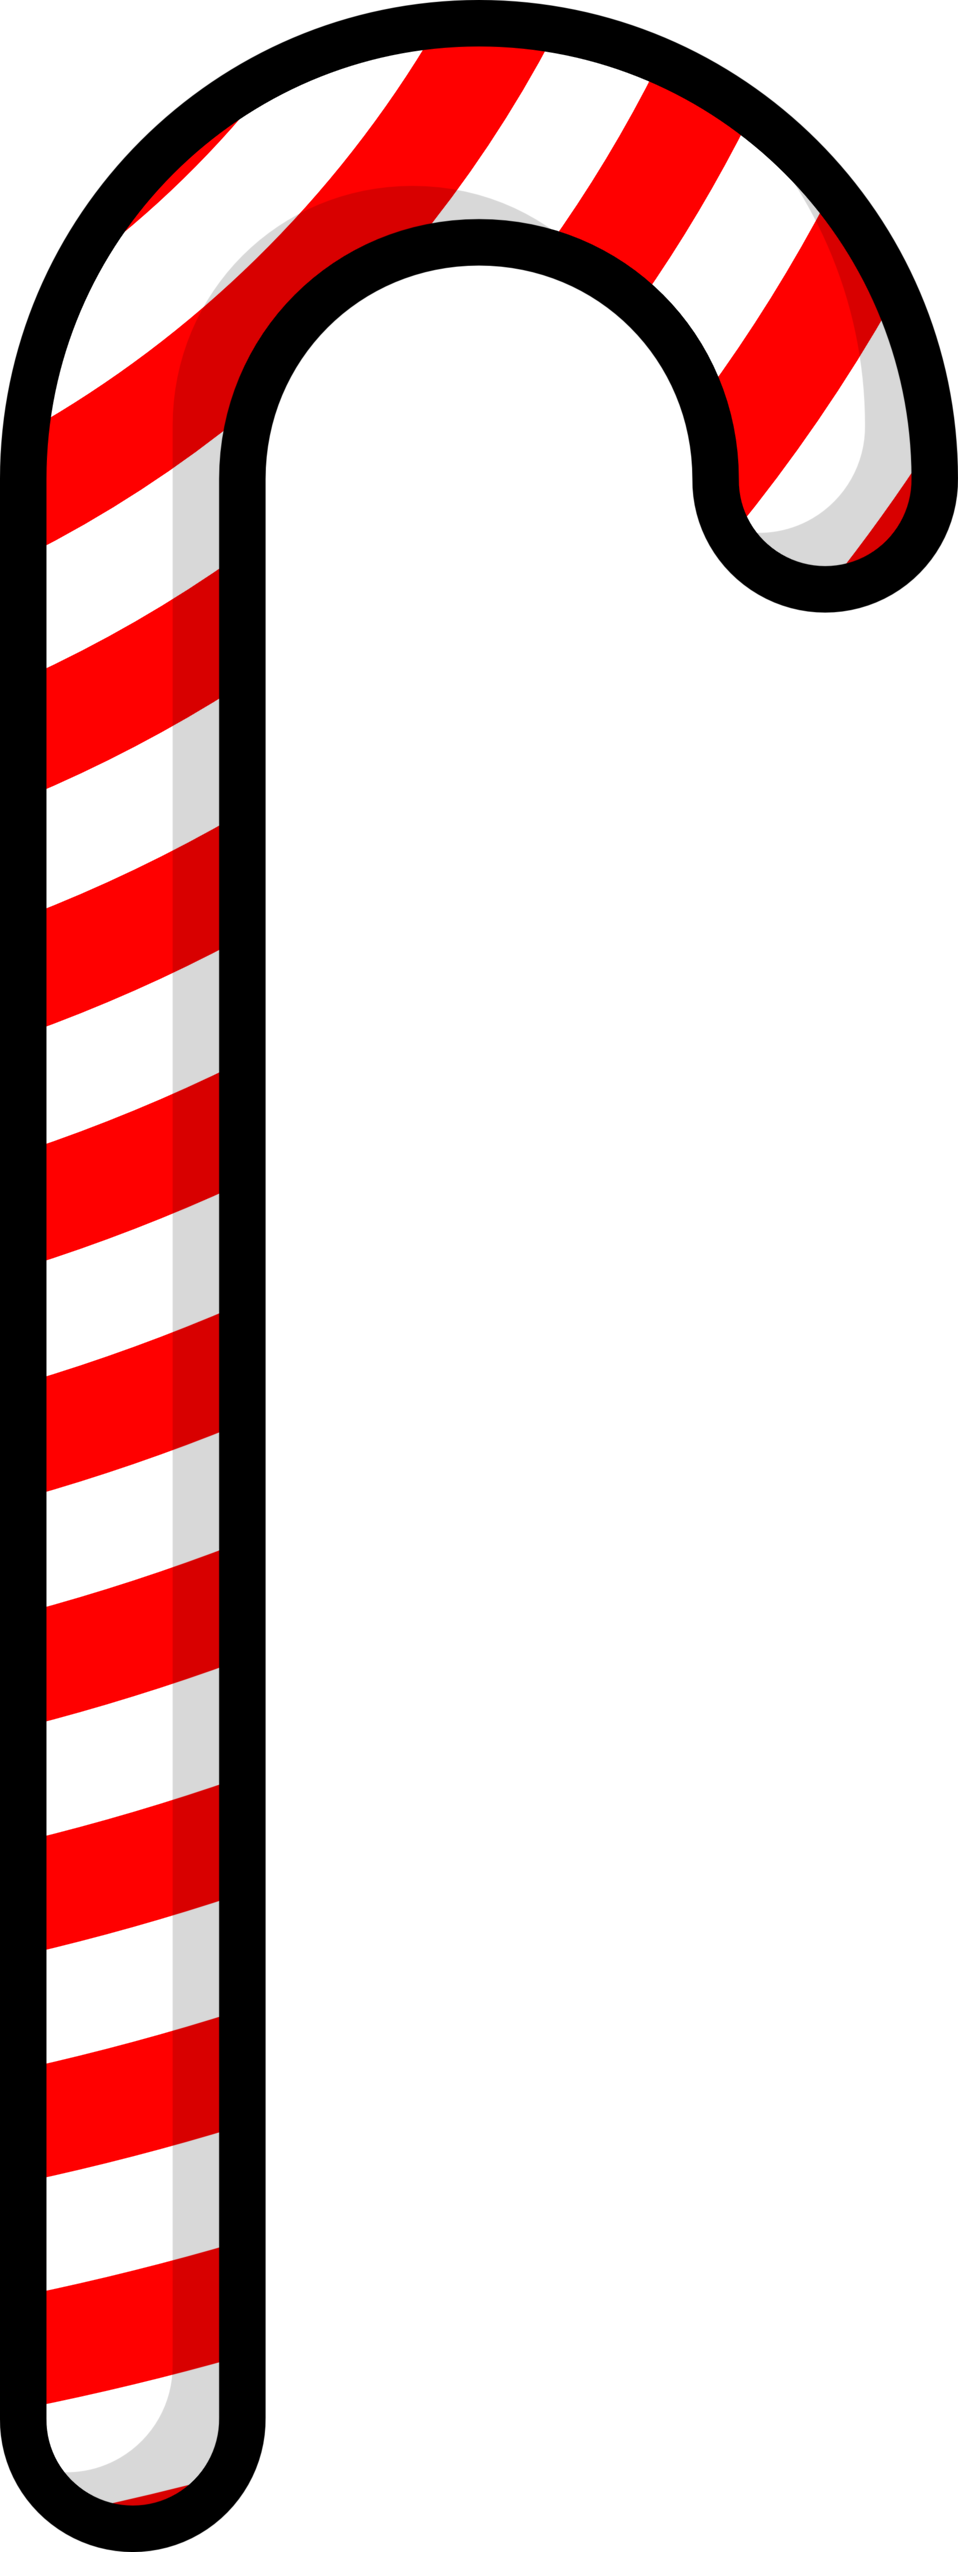 Inspiring Design Candy Cane Clipart Black And White - Candy Cane Clip Art (958x2552)